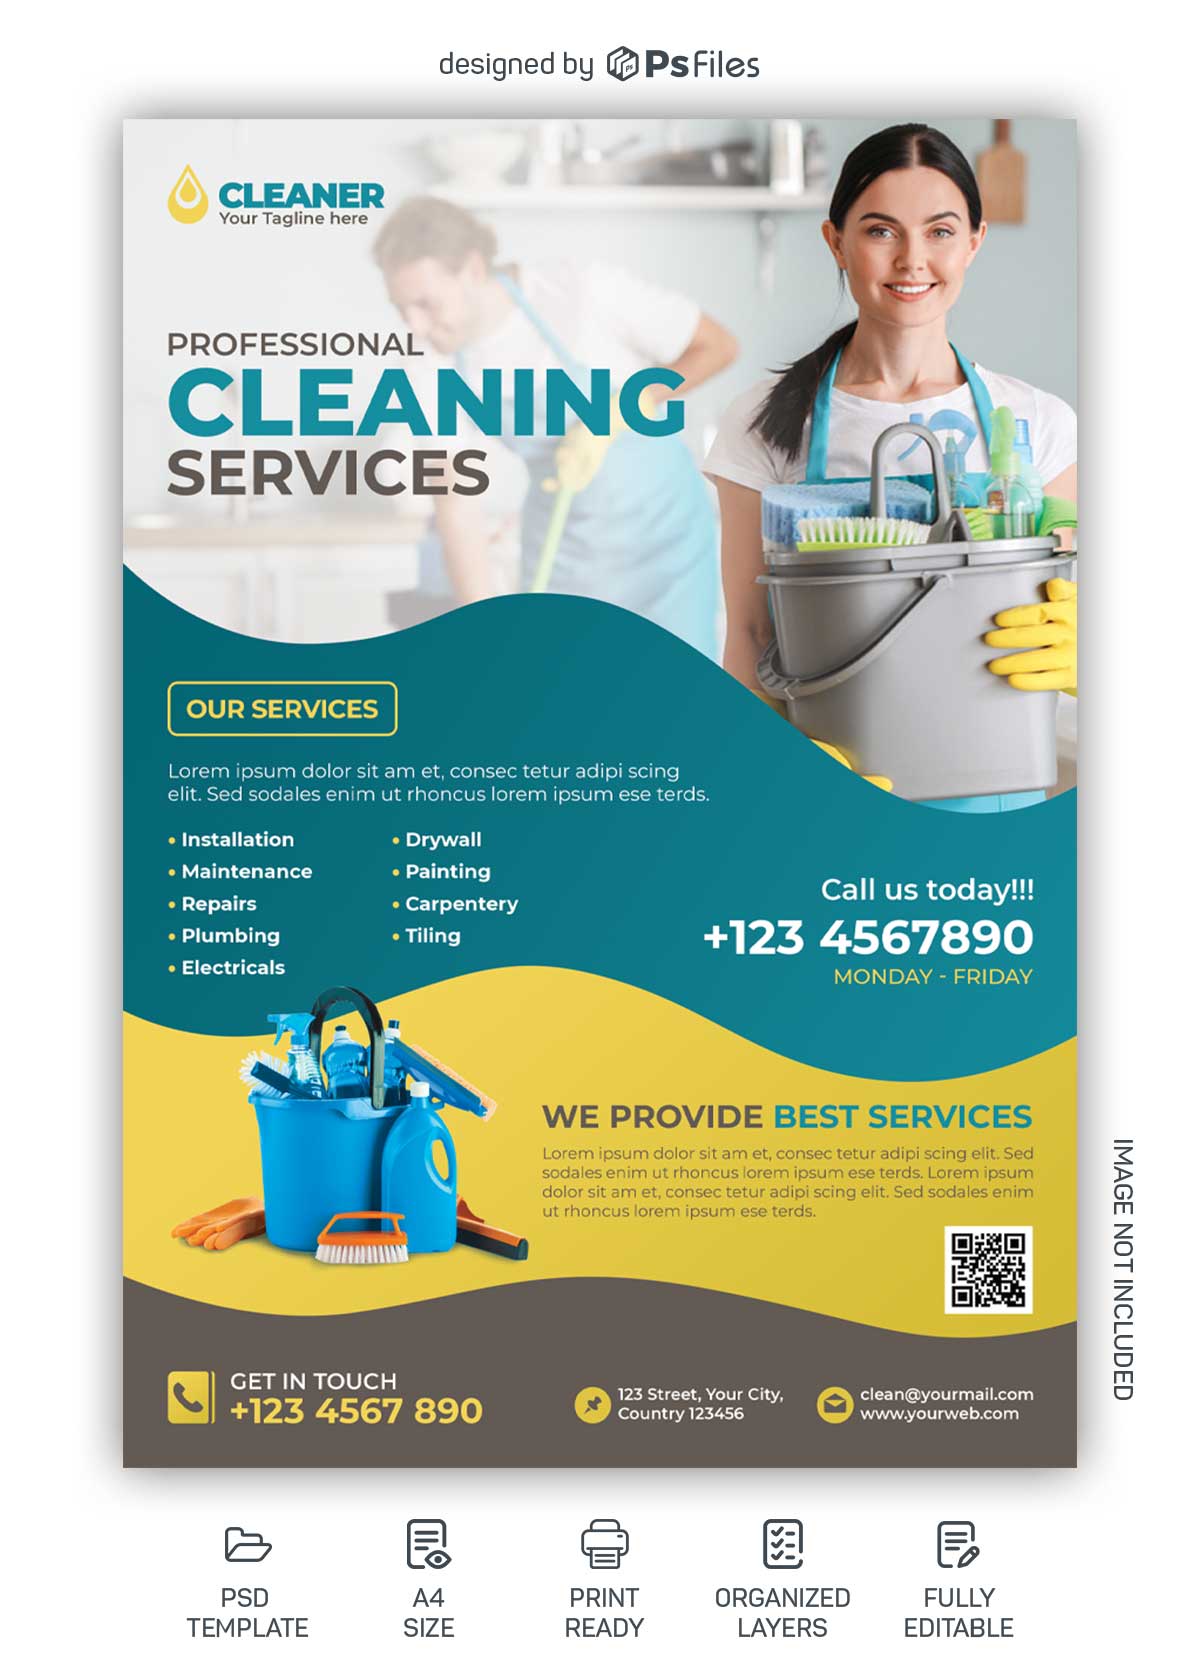 Professional Cleaning Service Business Flyer Design Template Free Psd